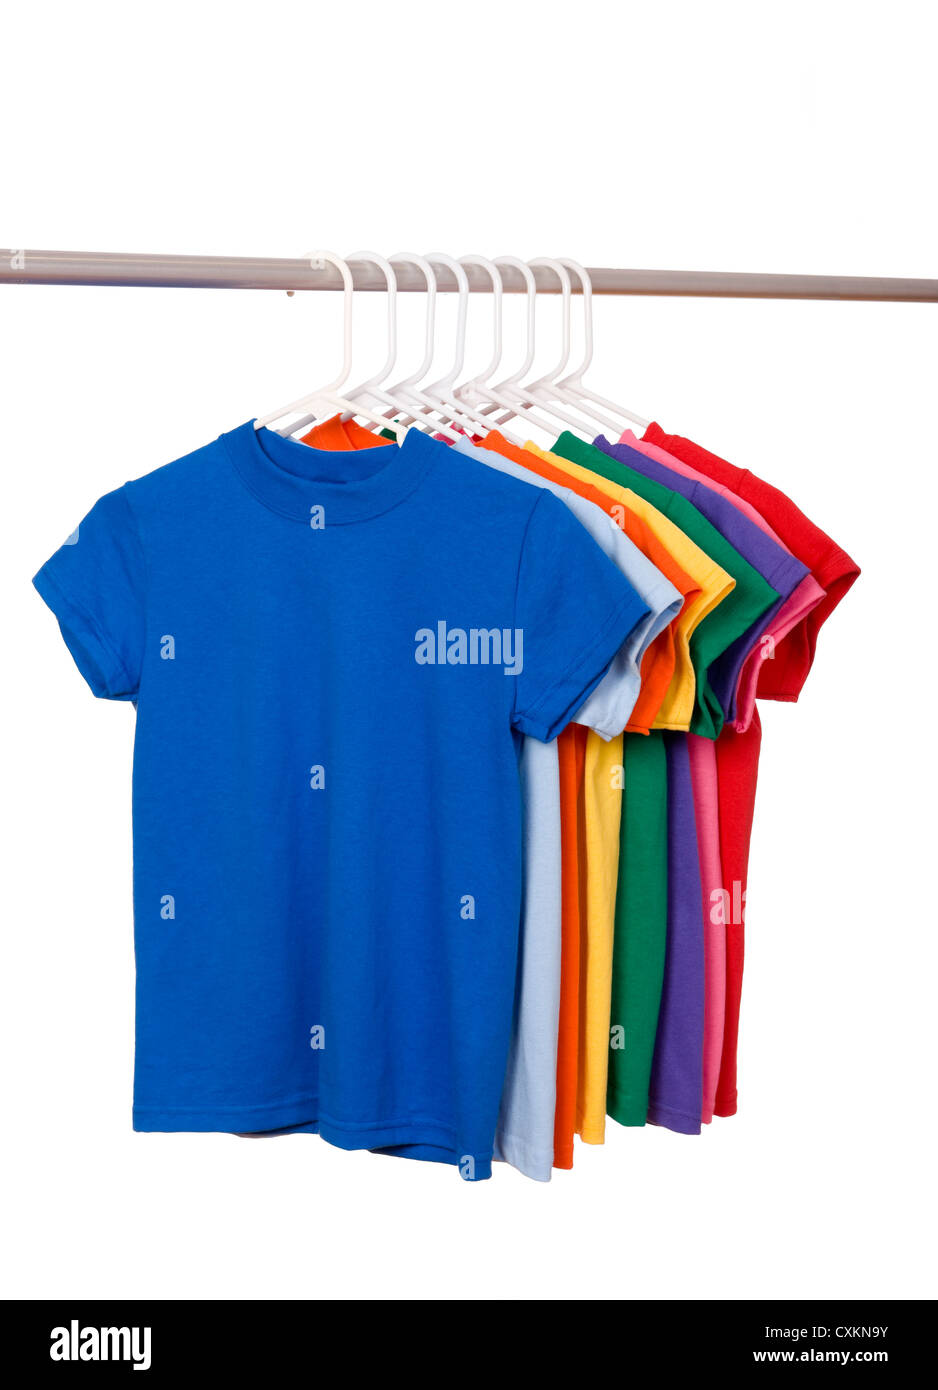 A row of colorful row t-shirts hanging on hangers on a white background Stock Photo